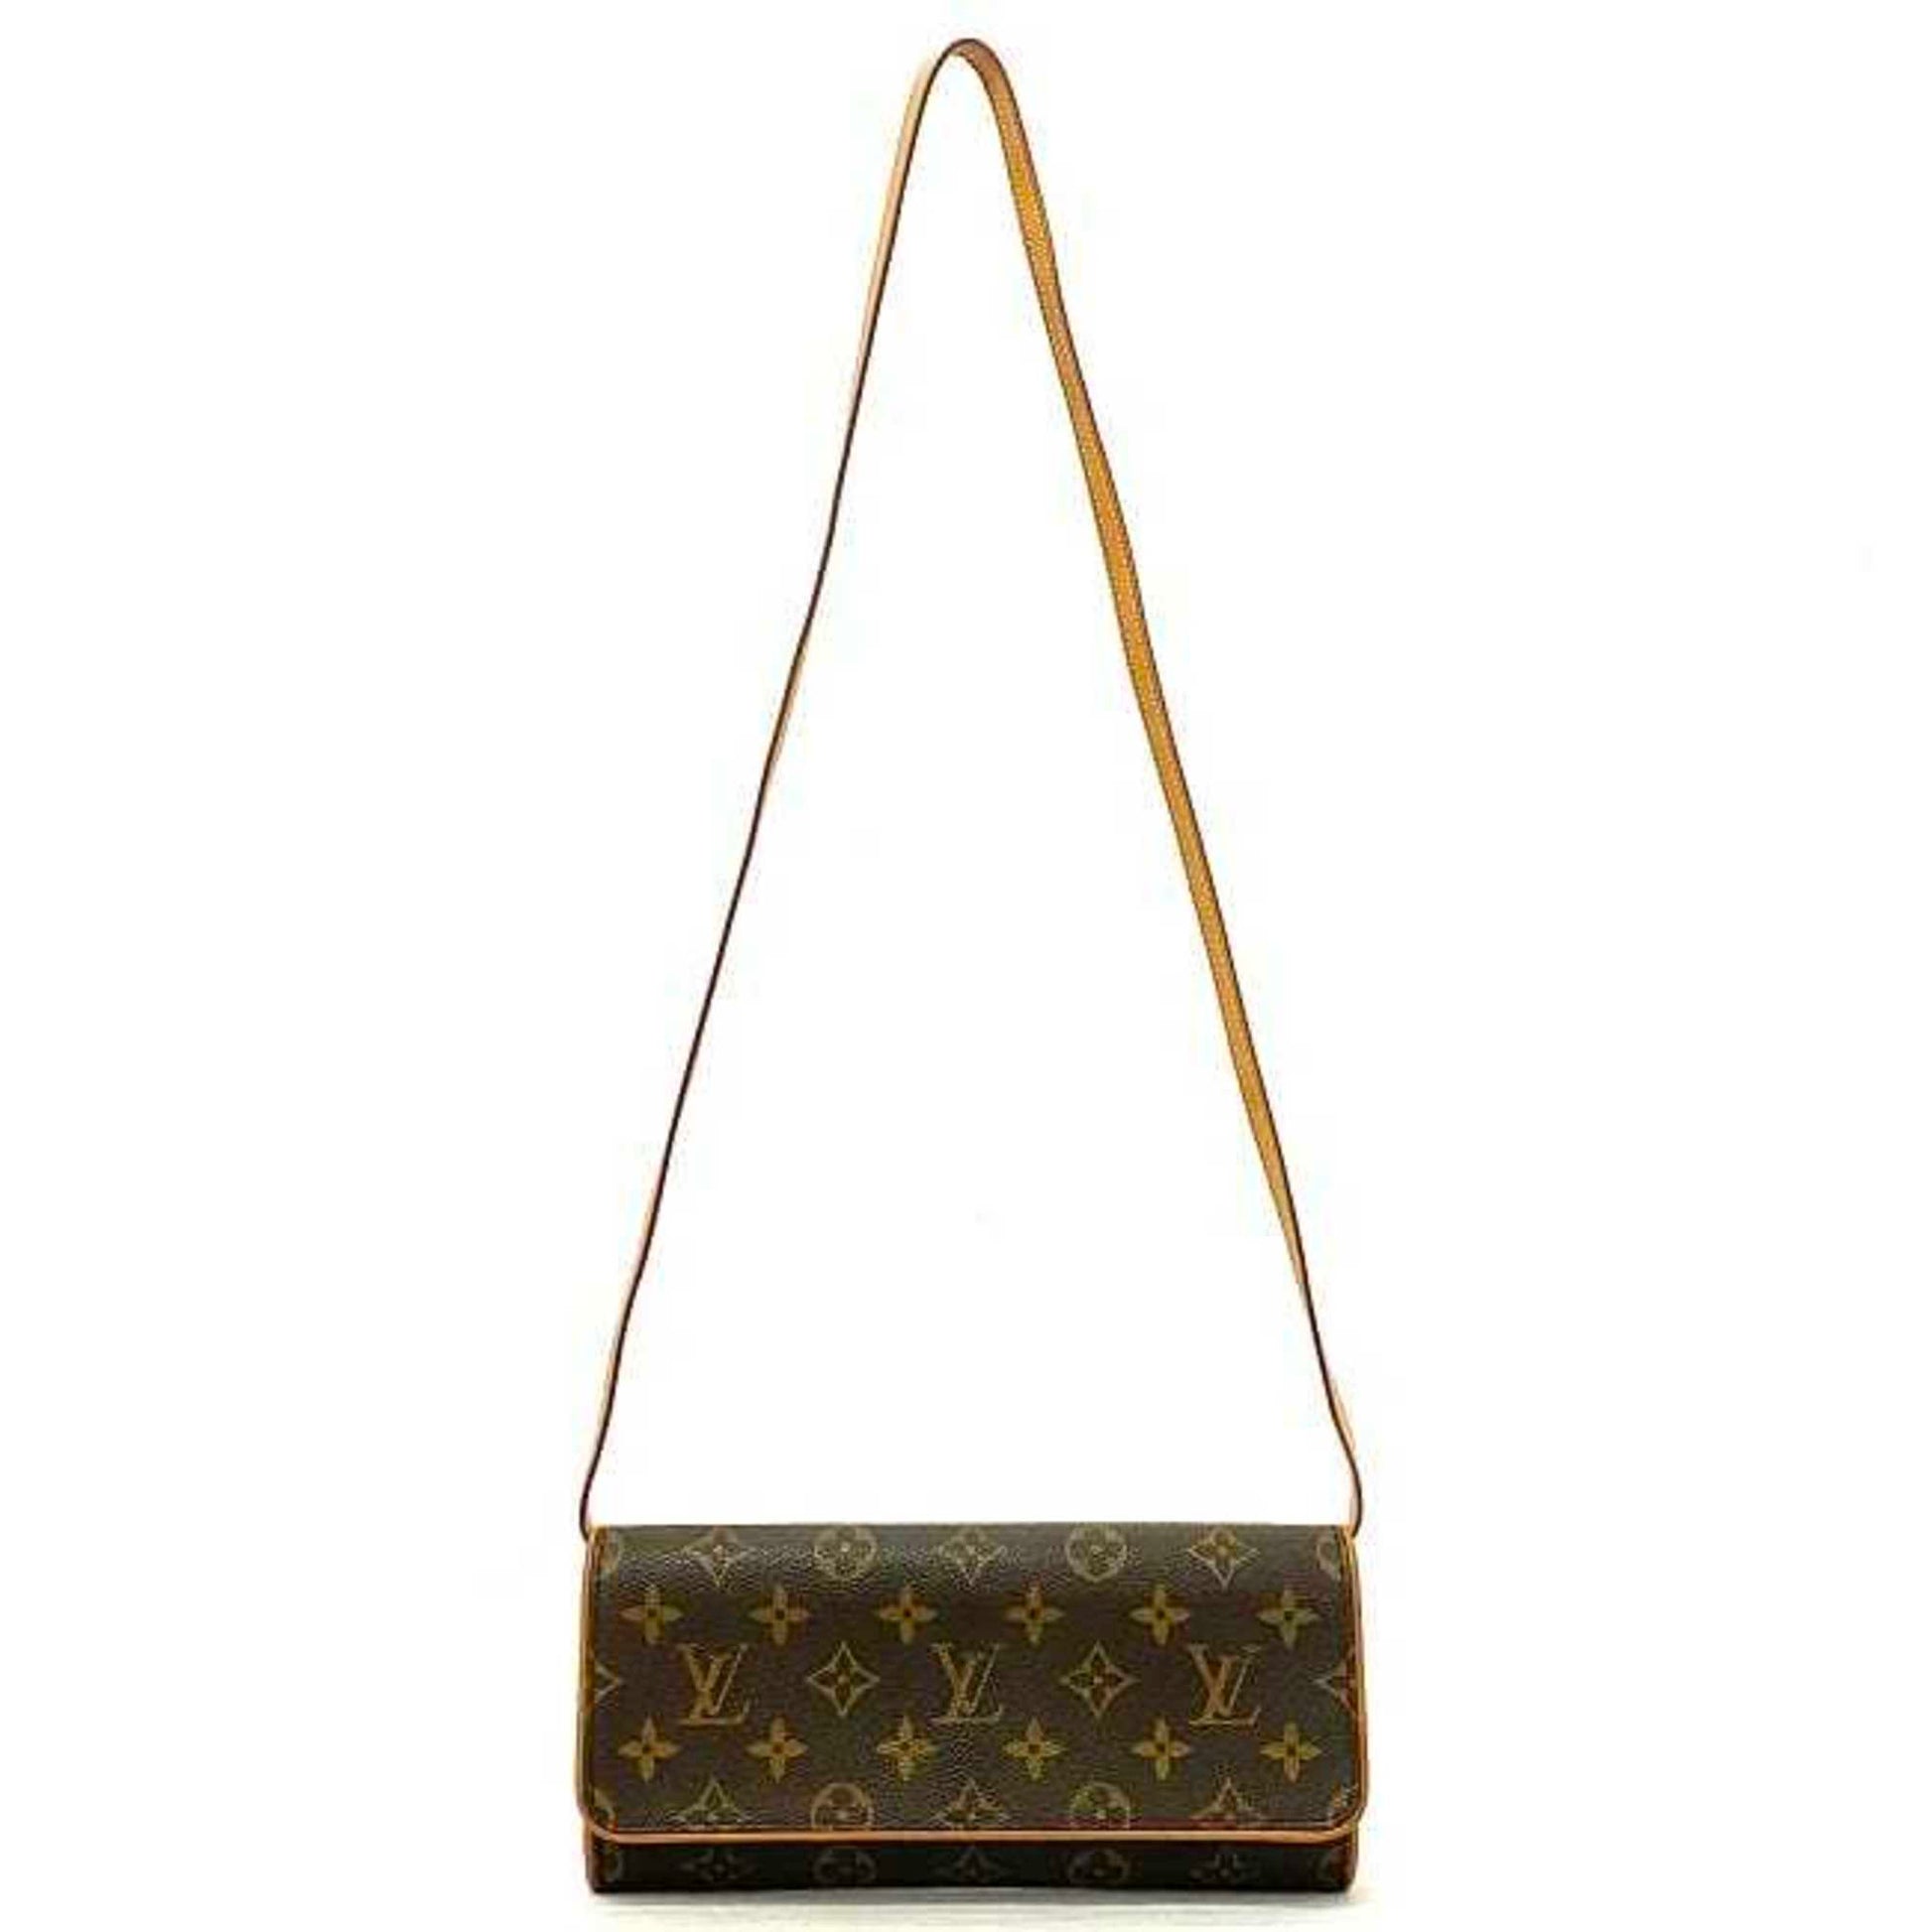 Buy Free Shipping [Bag] LOUIS VUITTON Louis Vuitton Taiga Pochette Voyage  MM Second Bag Clutch Bag Blue Marine Navy Red M63394 from Japan - Buy  authentic Plus exclusive items from Japan